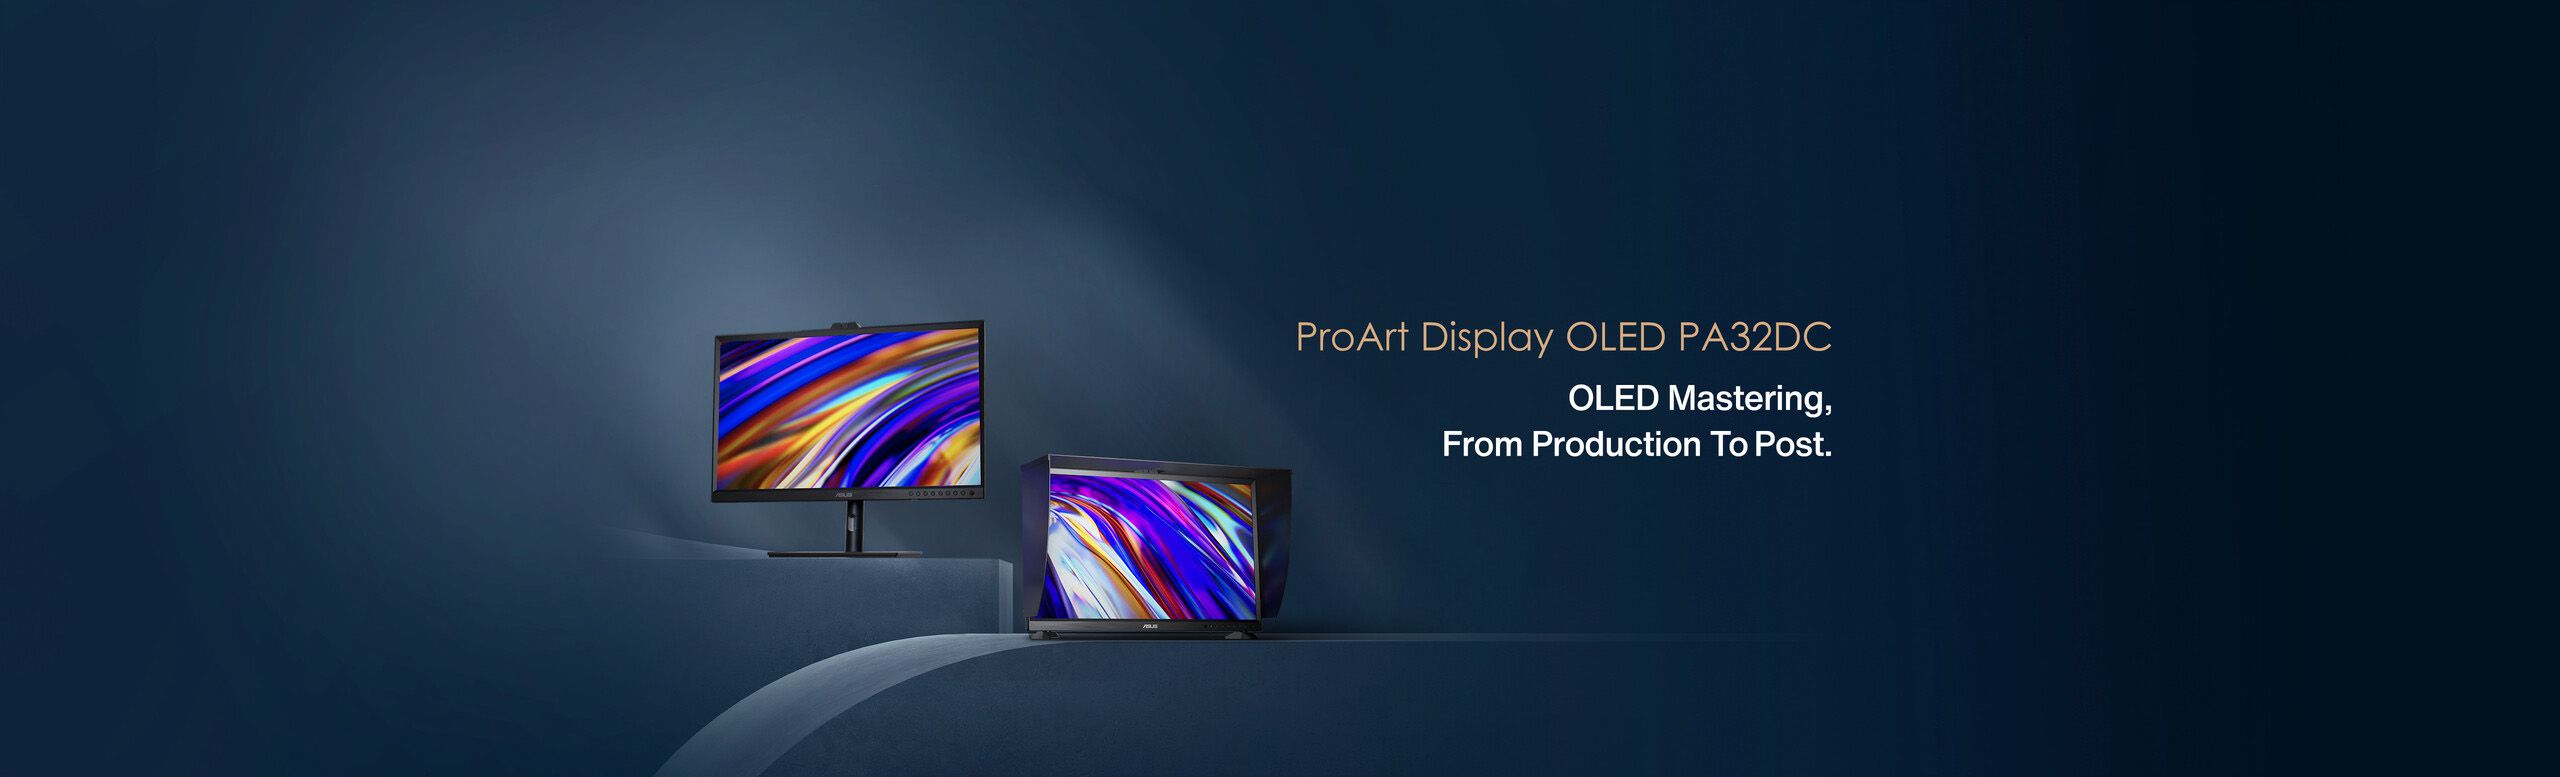 ProArt Display OLED PA32DC product photos with two different stands for onset or studio usage